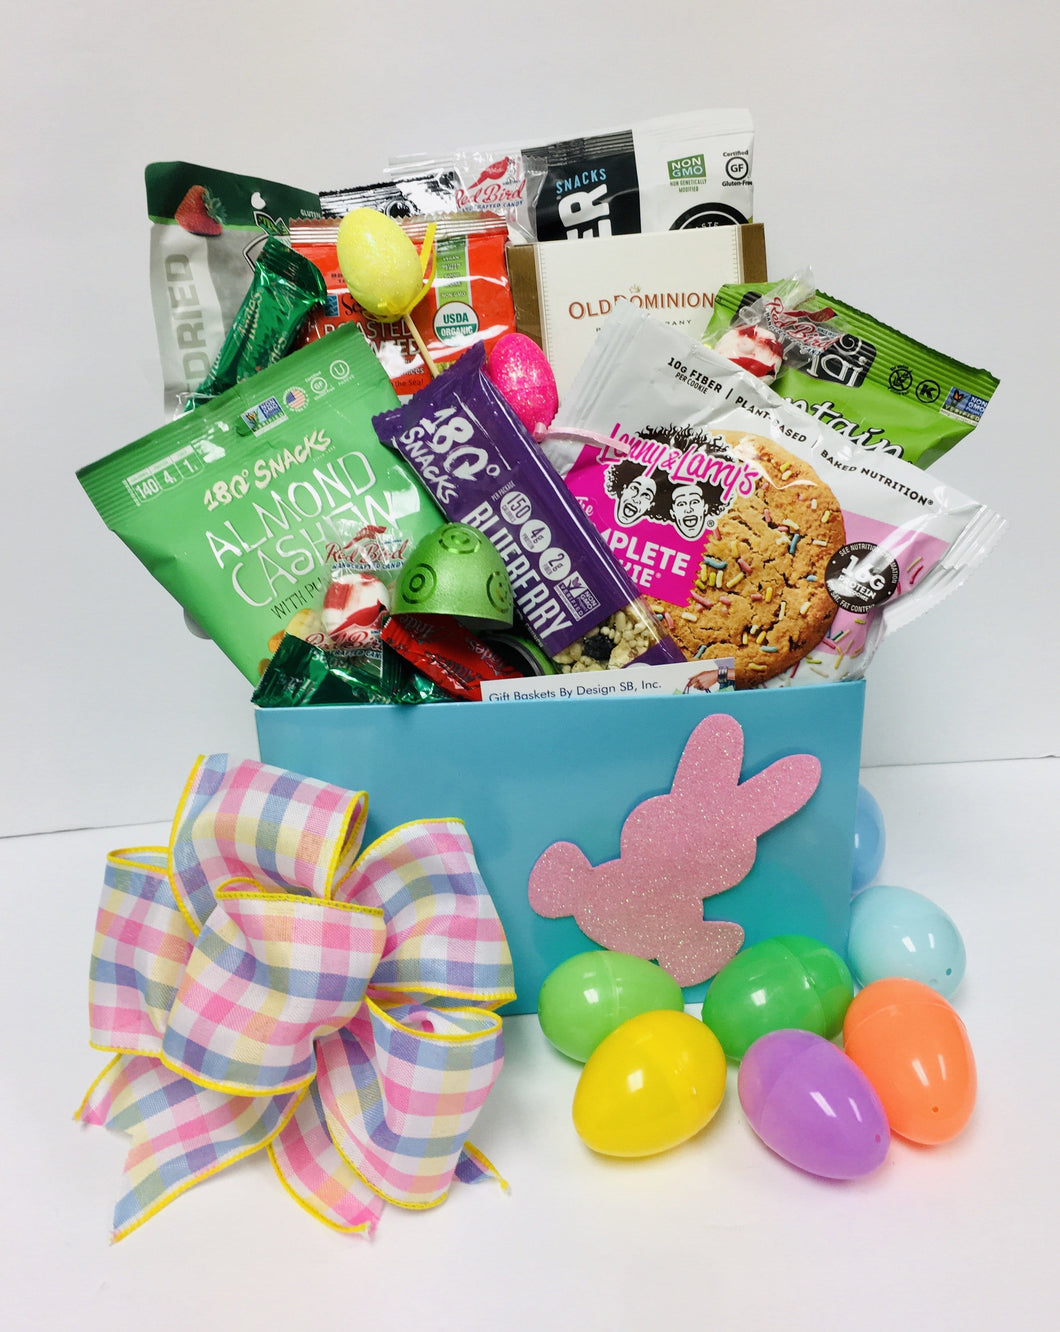 Gluten-Free - Vegan, Dairy Free With Bunny -4 Options *New - Gift Baskets By Design SB, Inc.